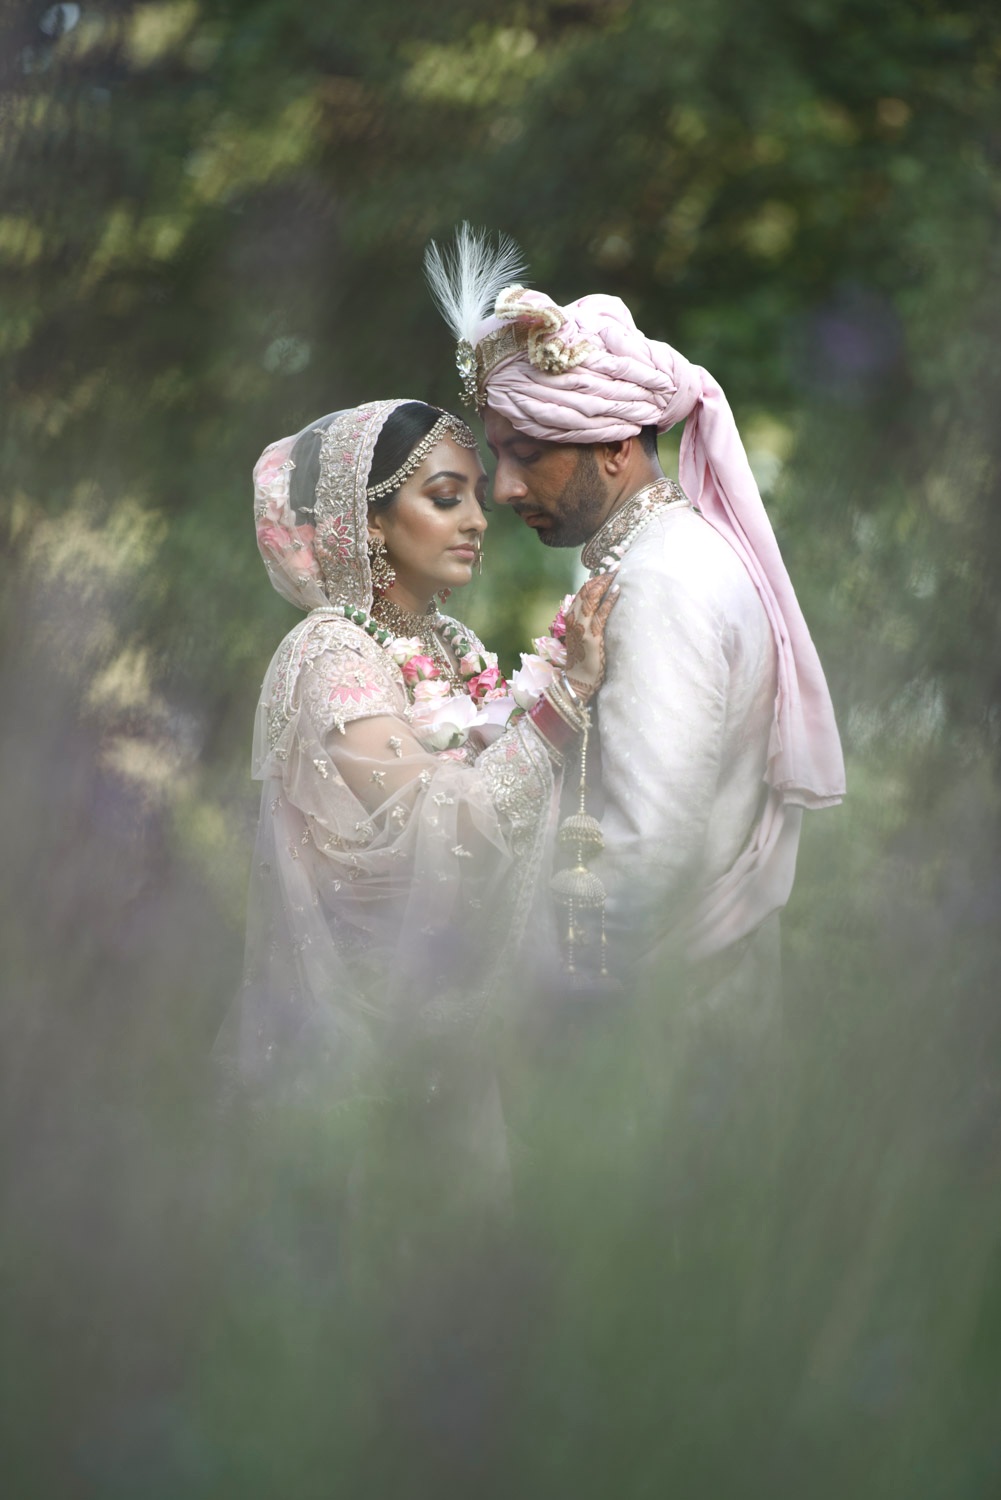 Asian Wedding Photography London - Sikh and Dread